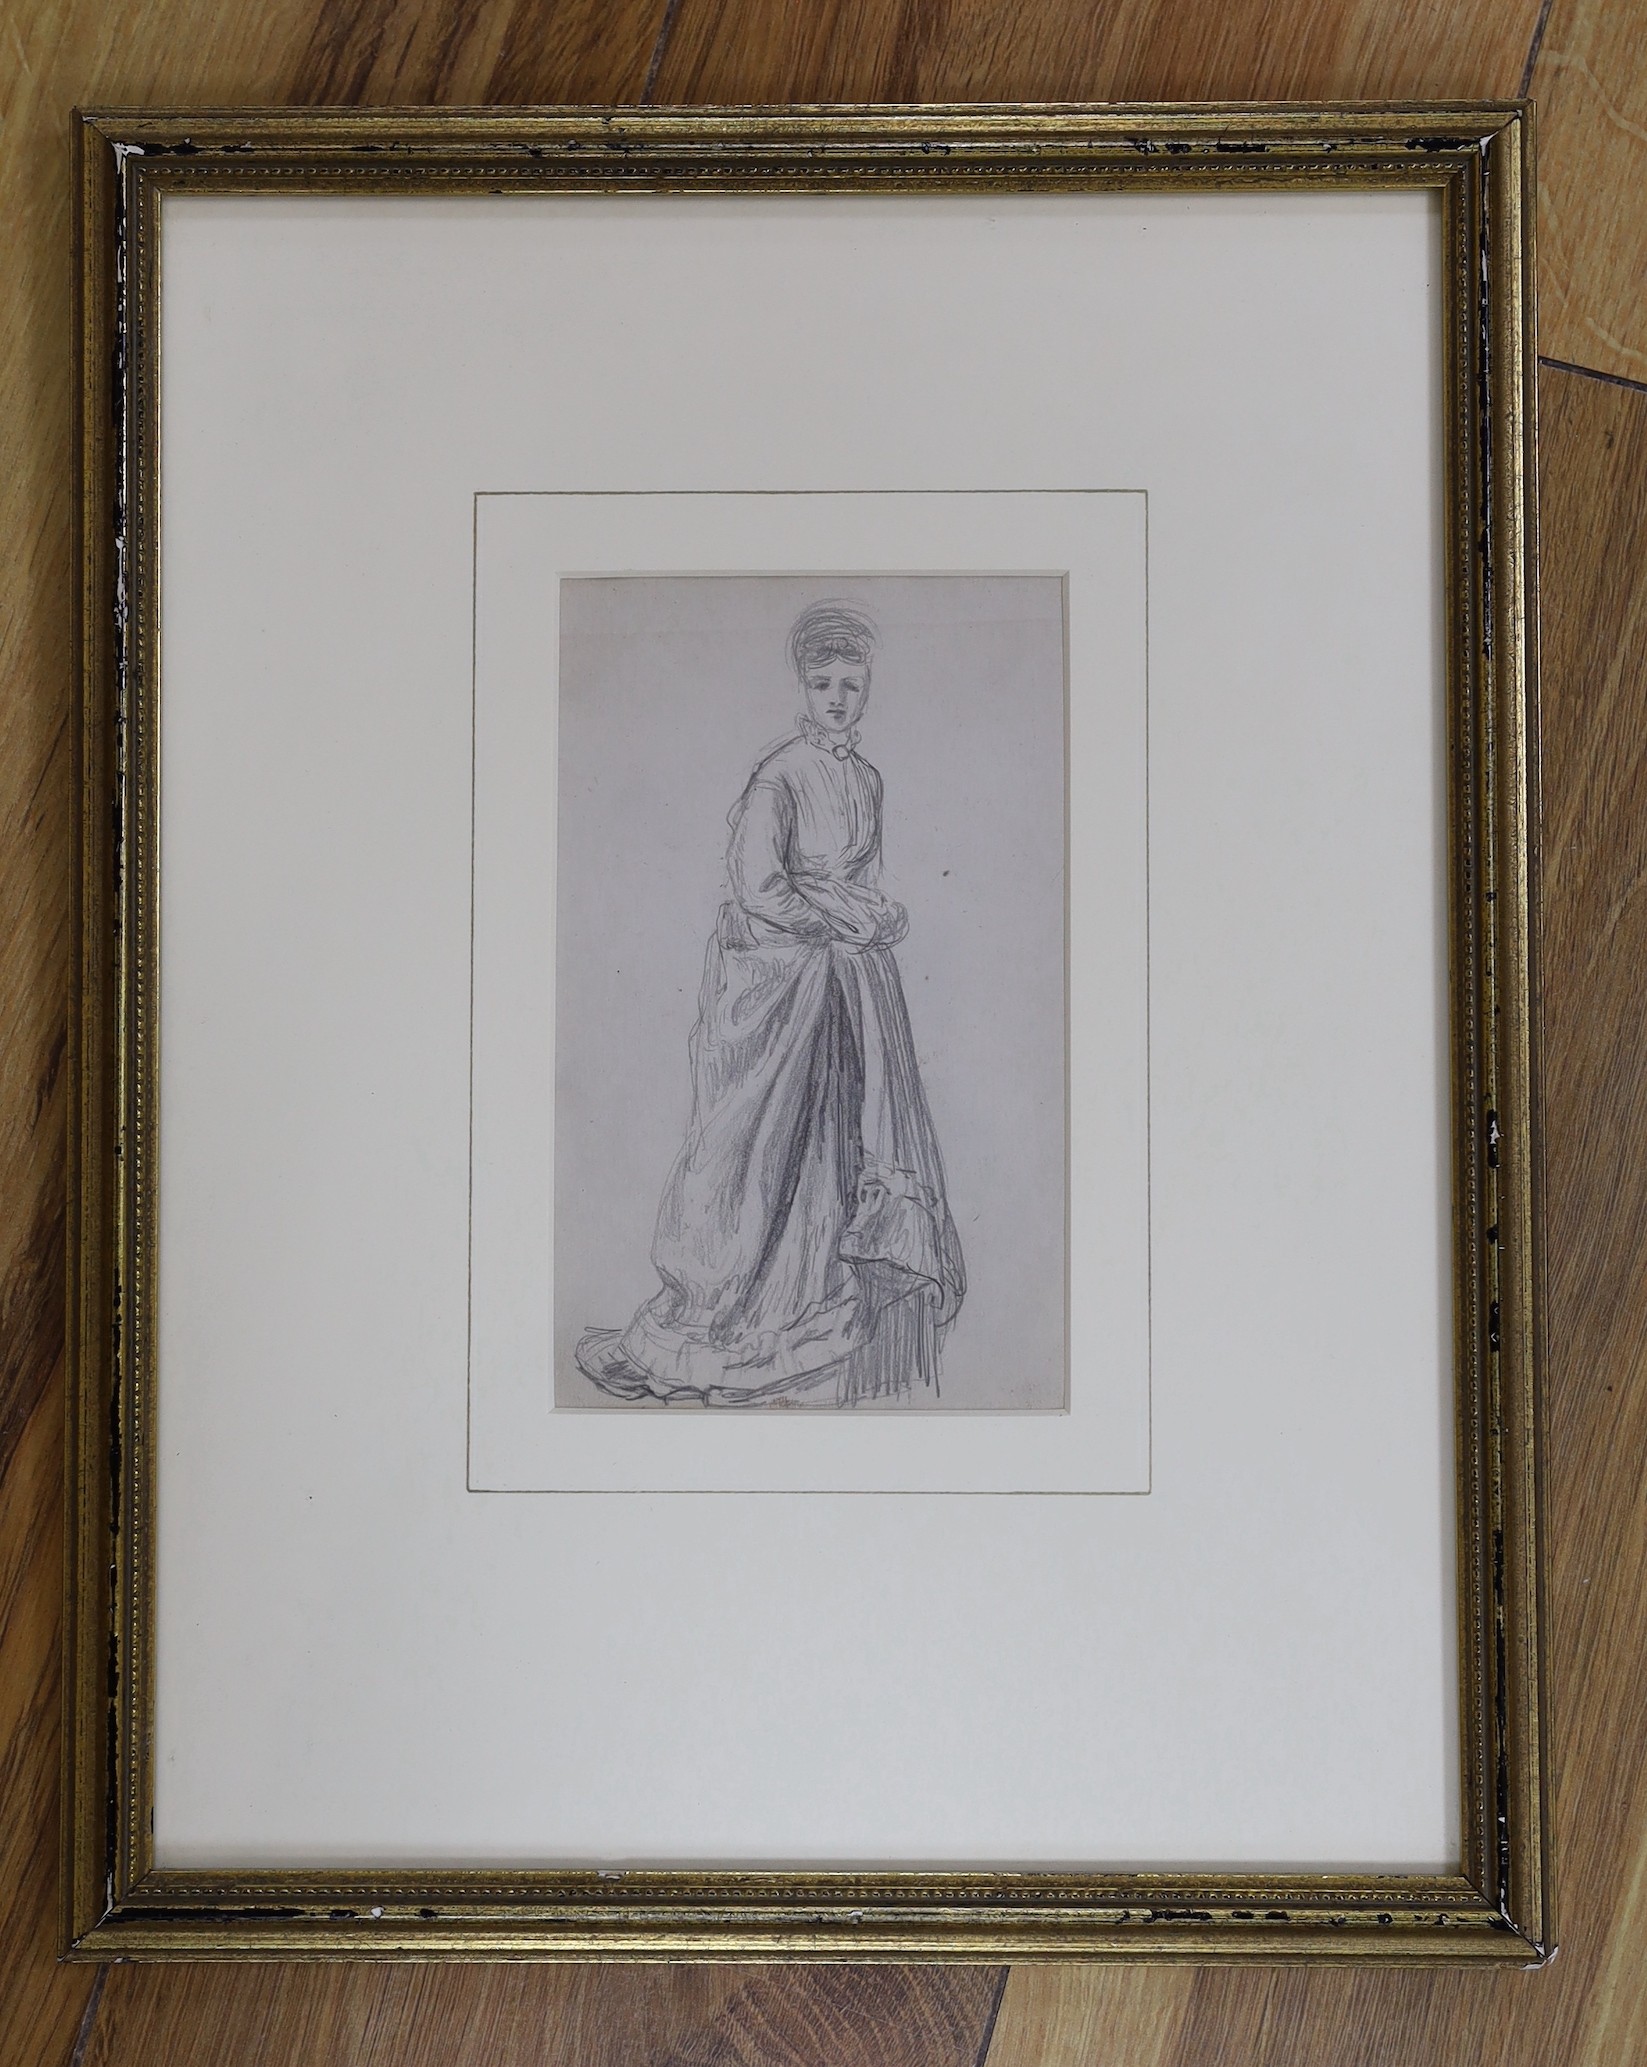 Helen Allingham (1848-1926), pencil sketch, Study from life of a standing woman, label verso, 15 x 9.5cm